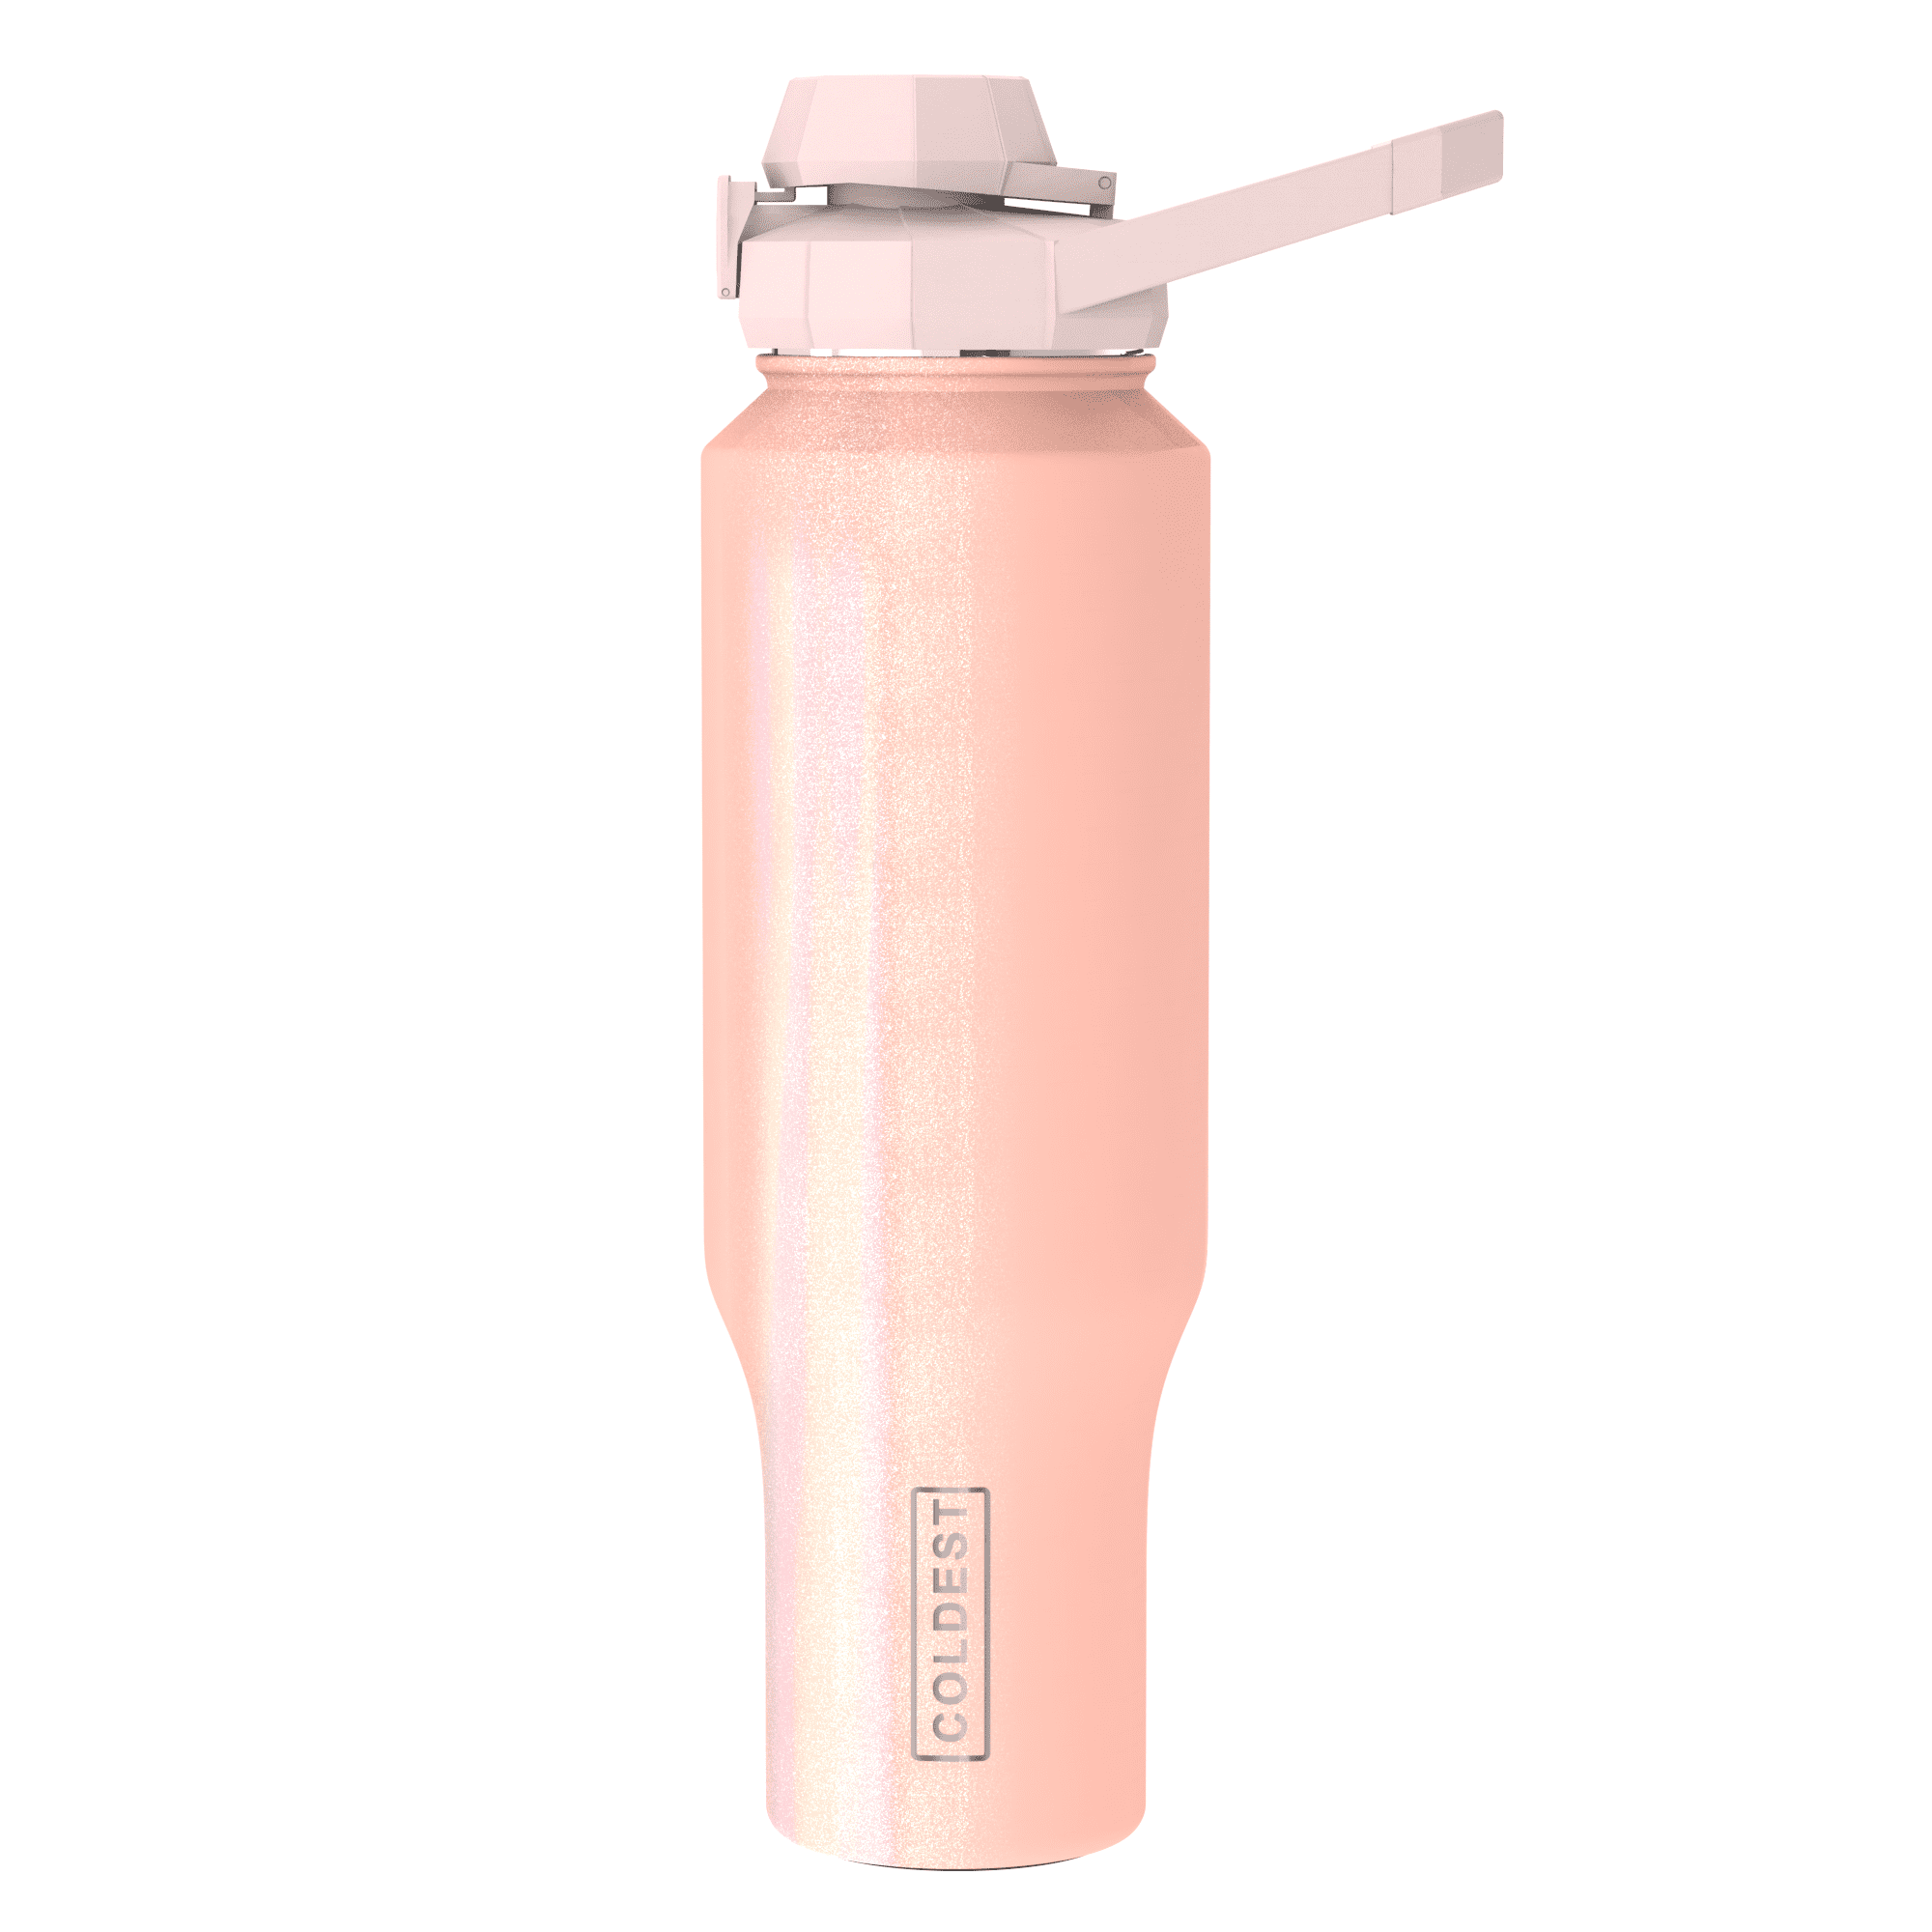 Coldest Shaker Bottle - Protein Blender Shaker Cup for Protein Mixes  Insulated Chug lid Bottle,Bottl…See more Coldest Shaker Bottle - Protein  Blender